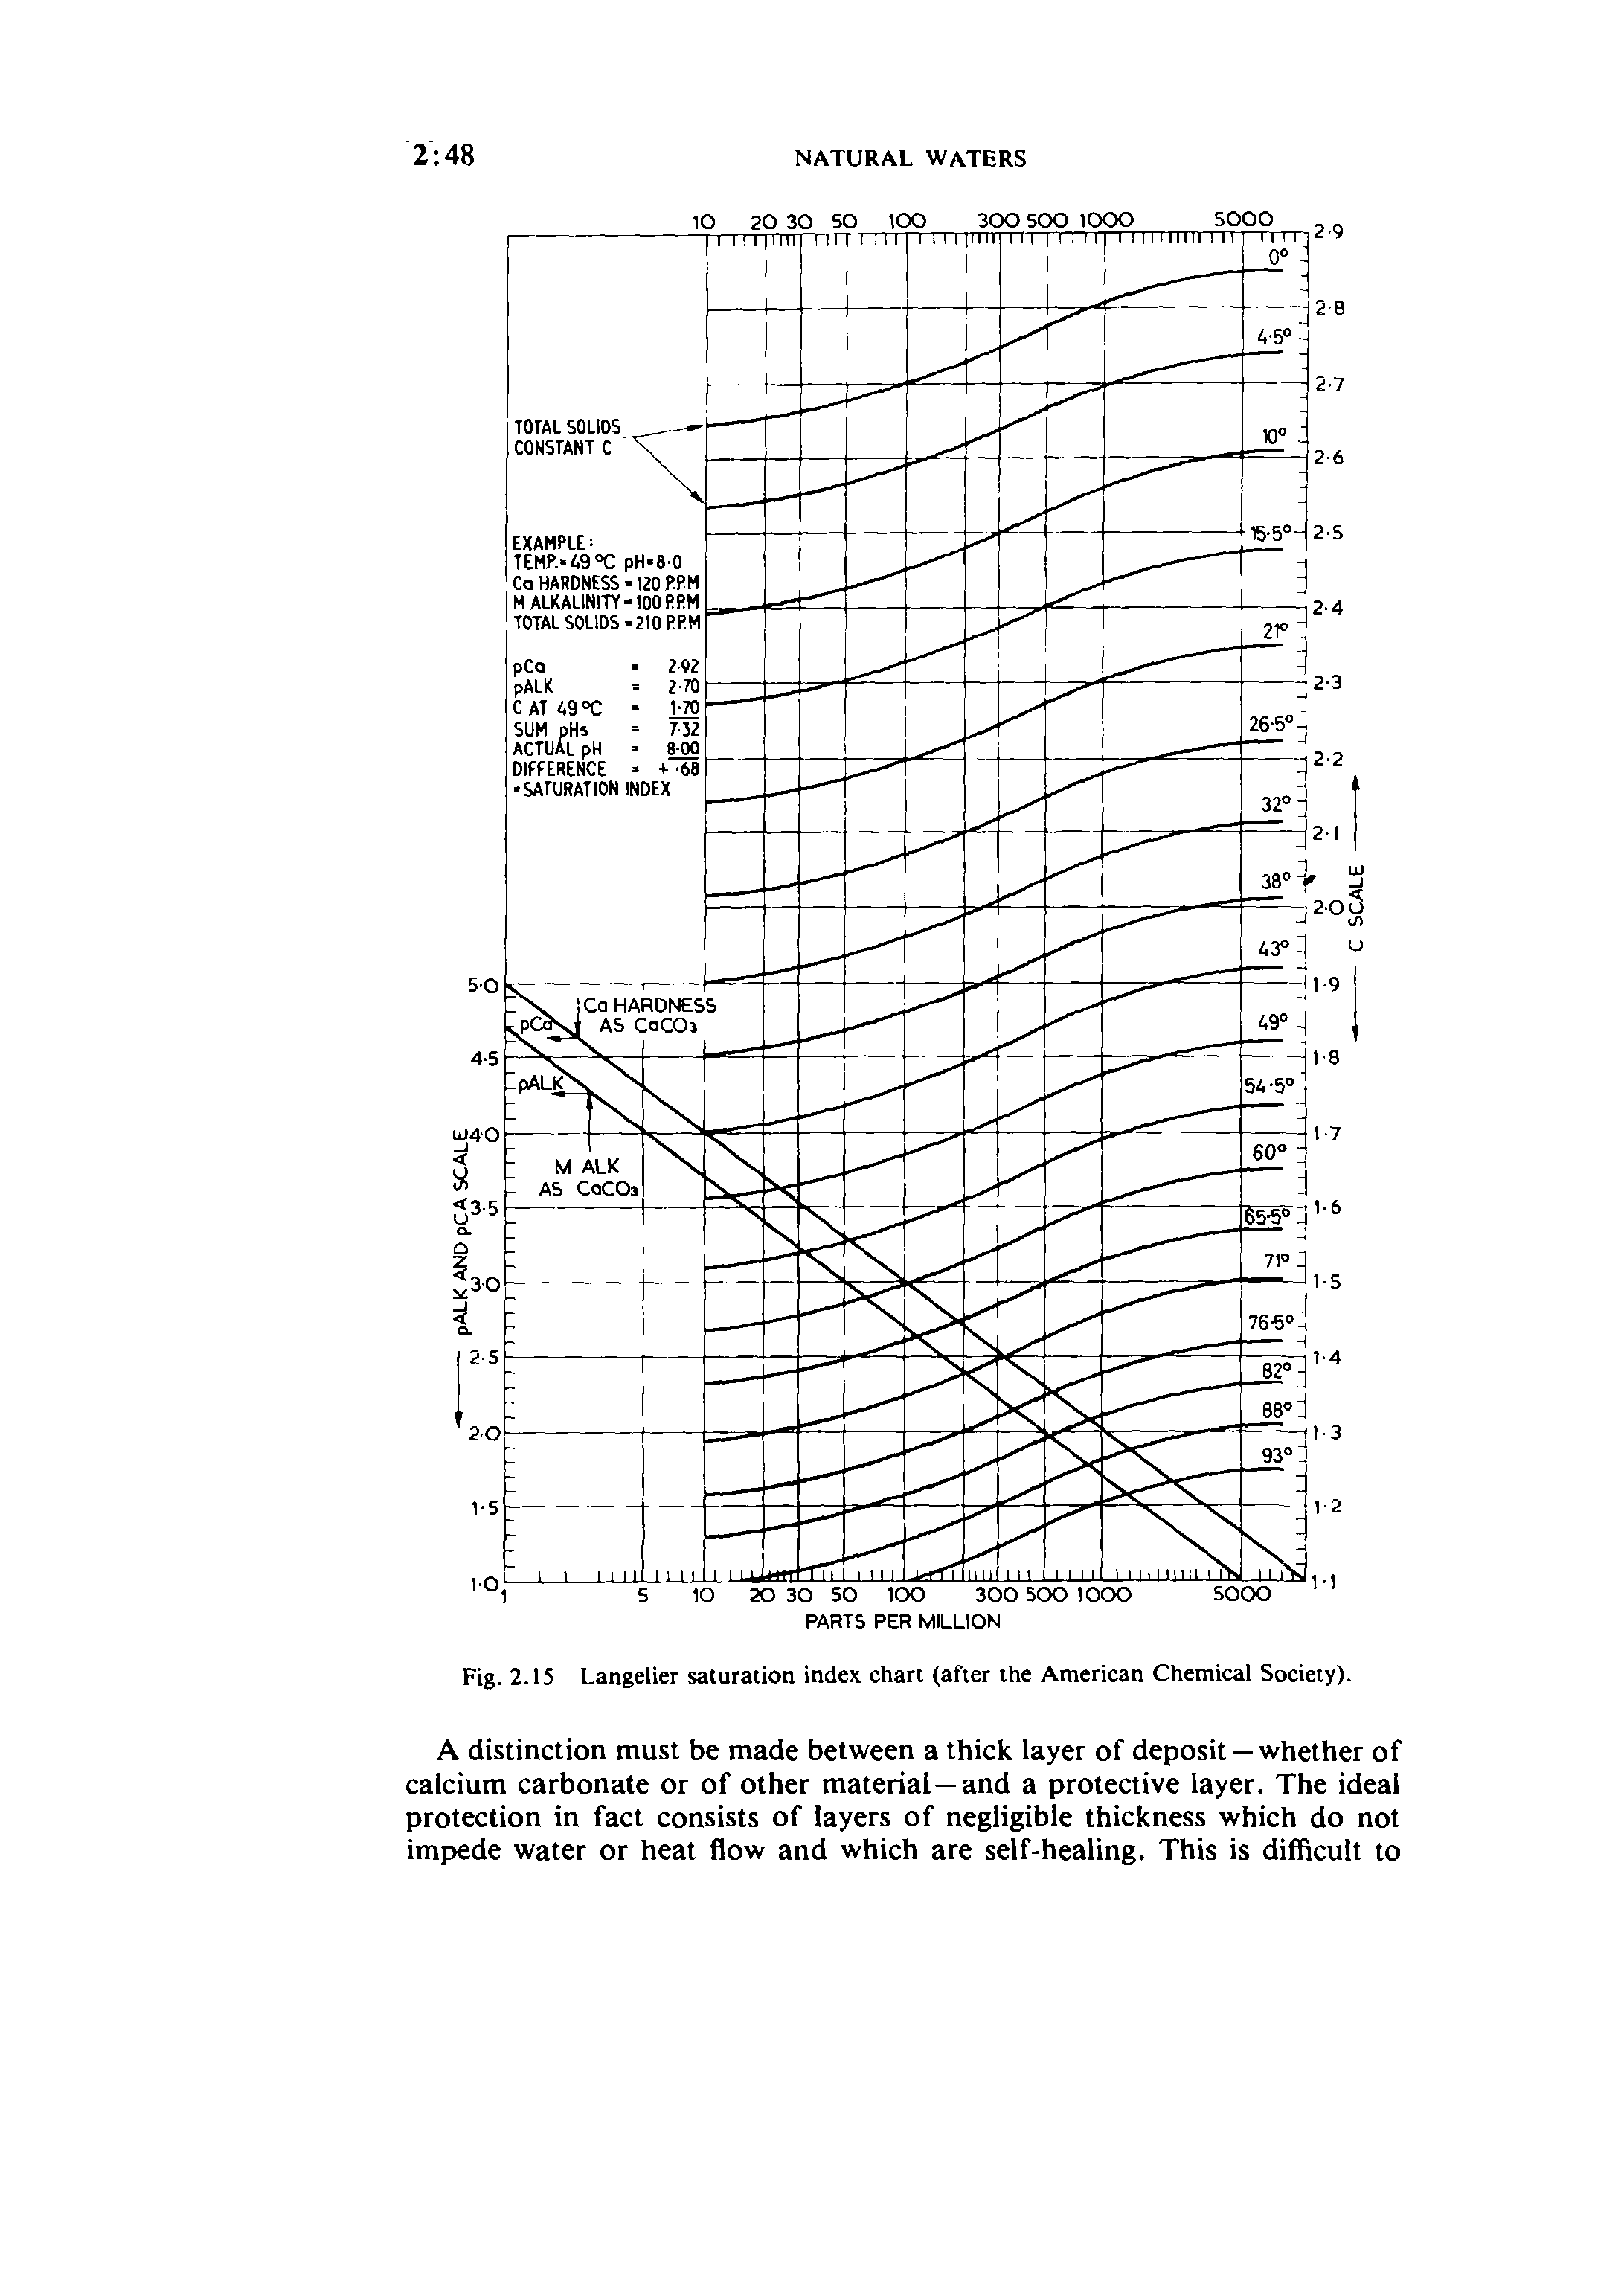 Fig. 2.15 Langelier saturation index chart (after the American Chemical Society).